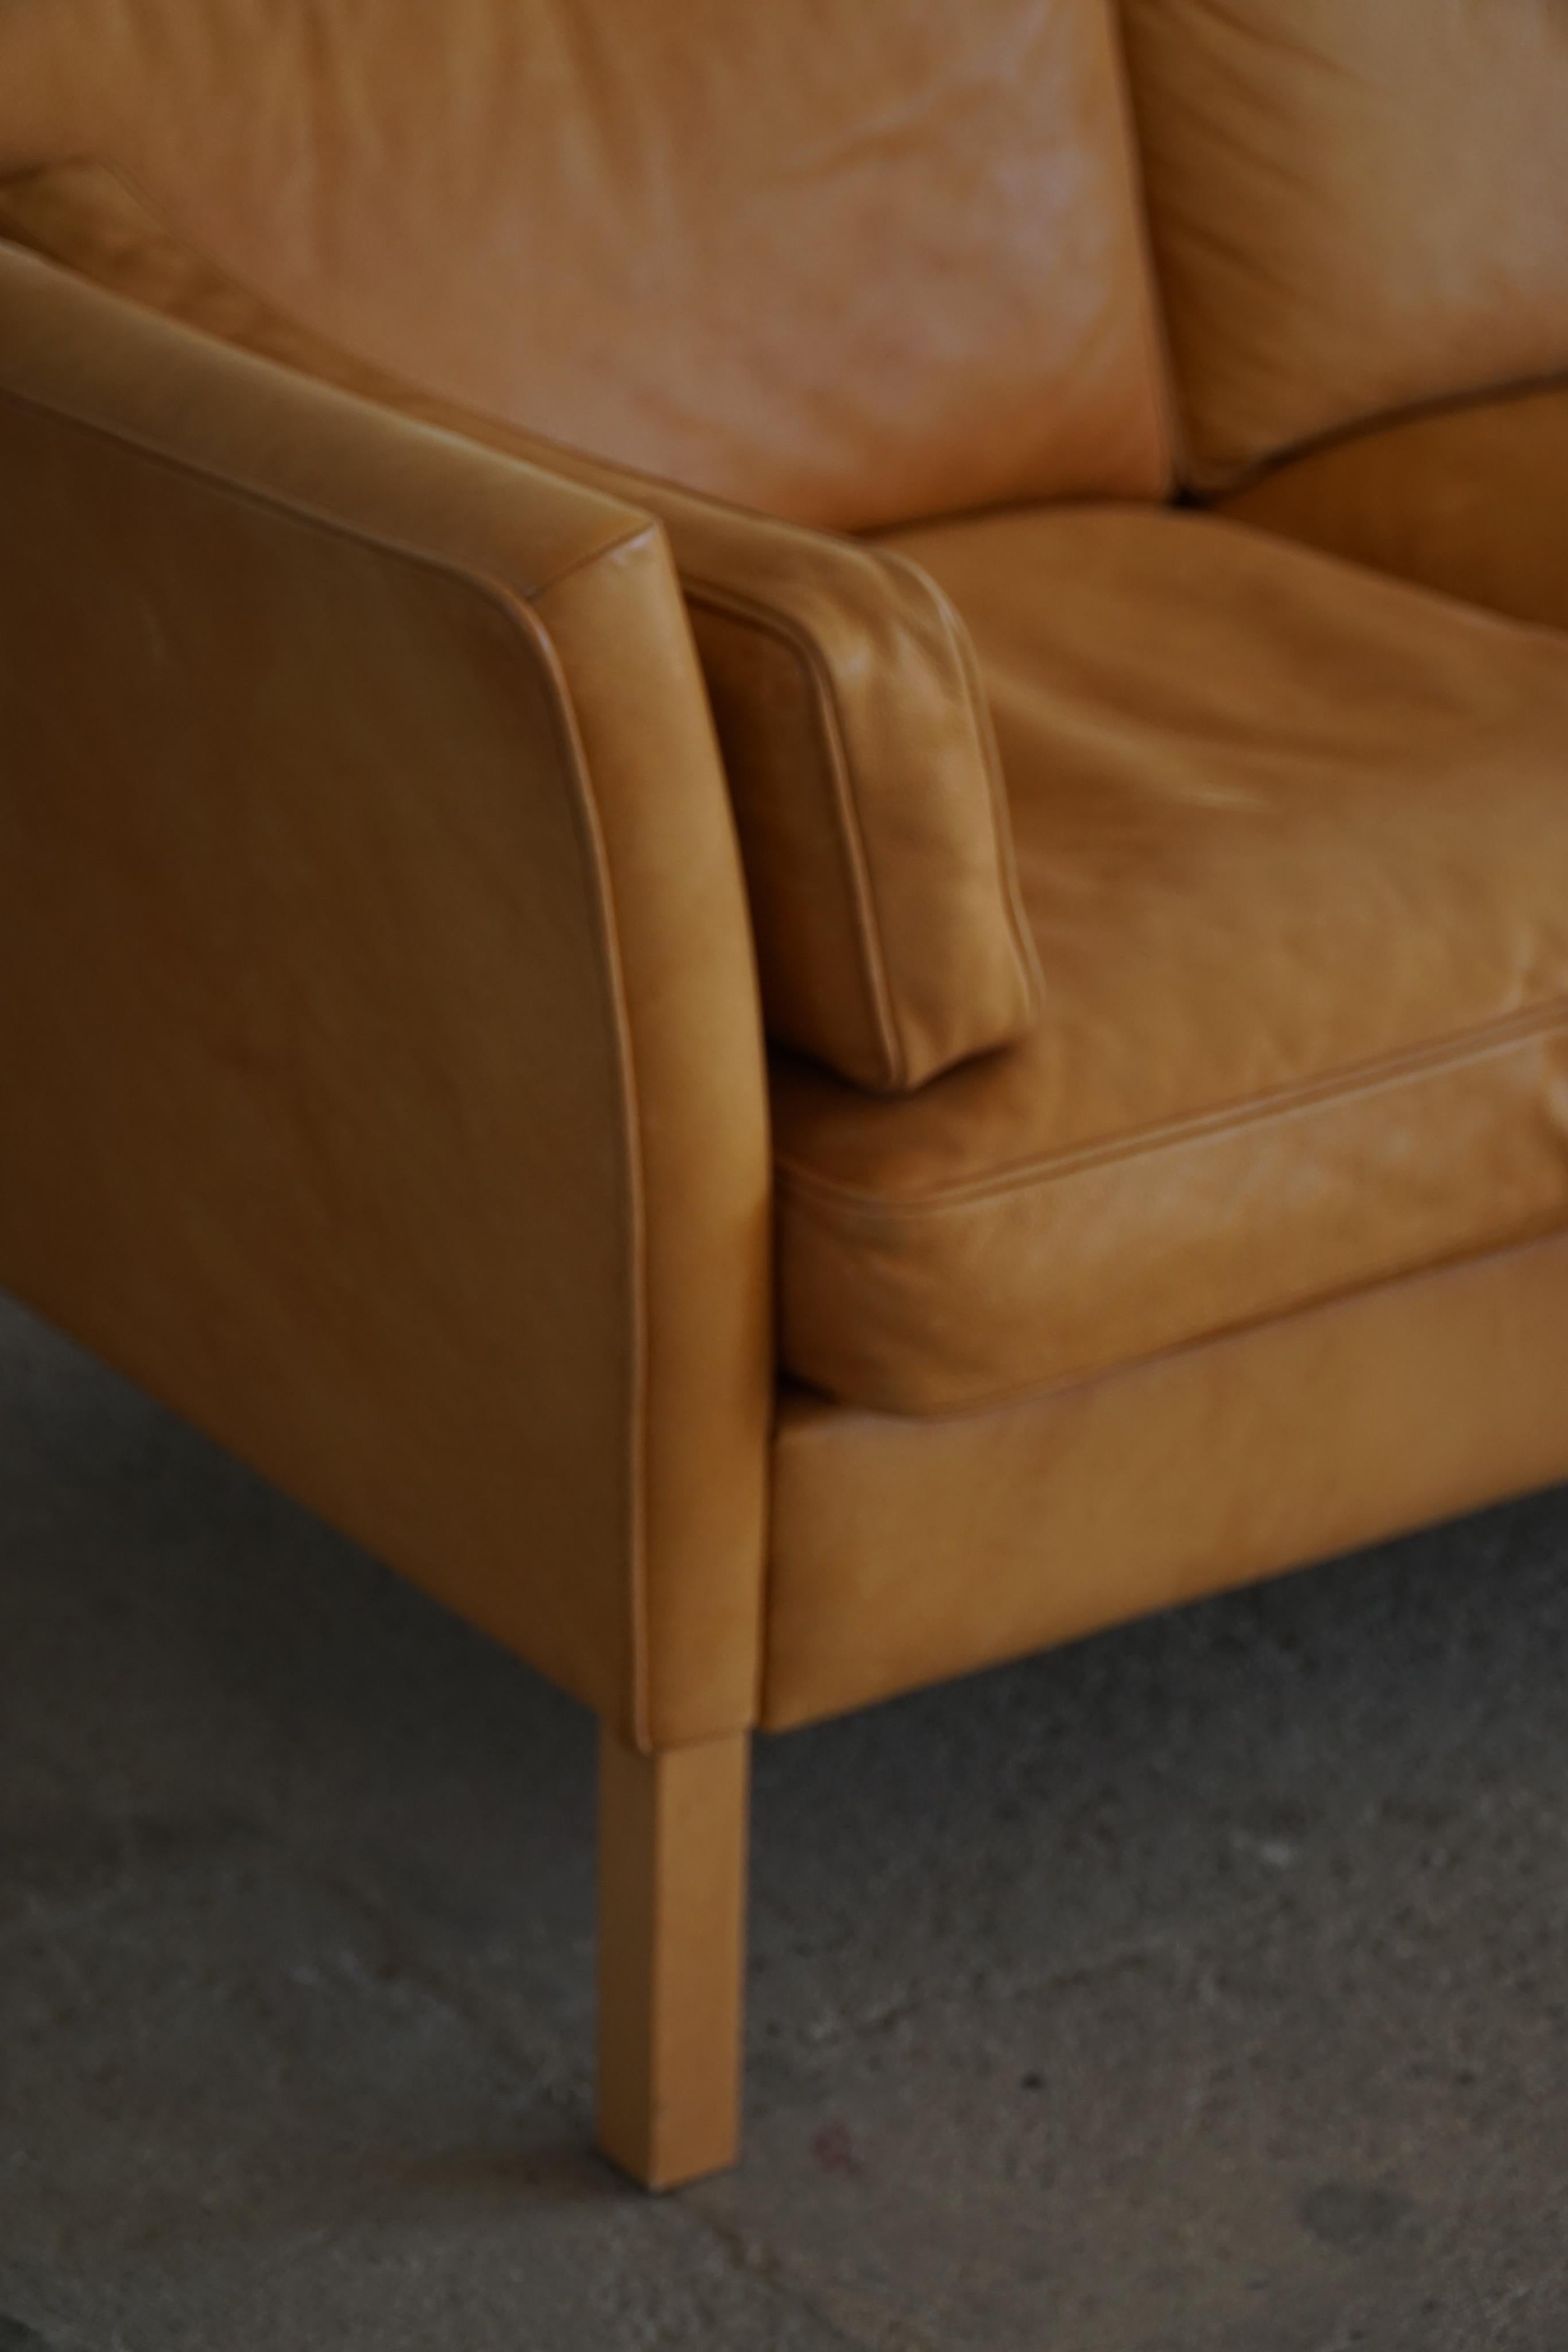 Danish Midcentury Stouby 3-Seater Sofa in Cognac Brown Leather, Made in 1970s For Sale 11